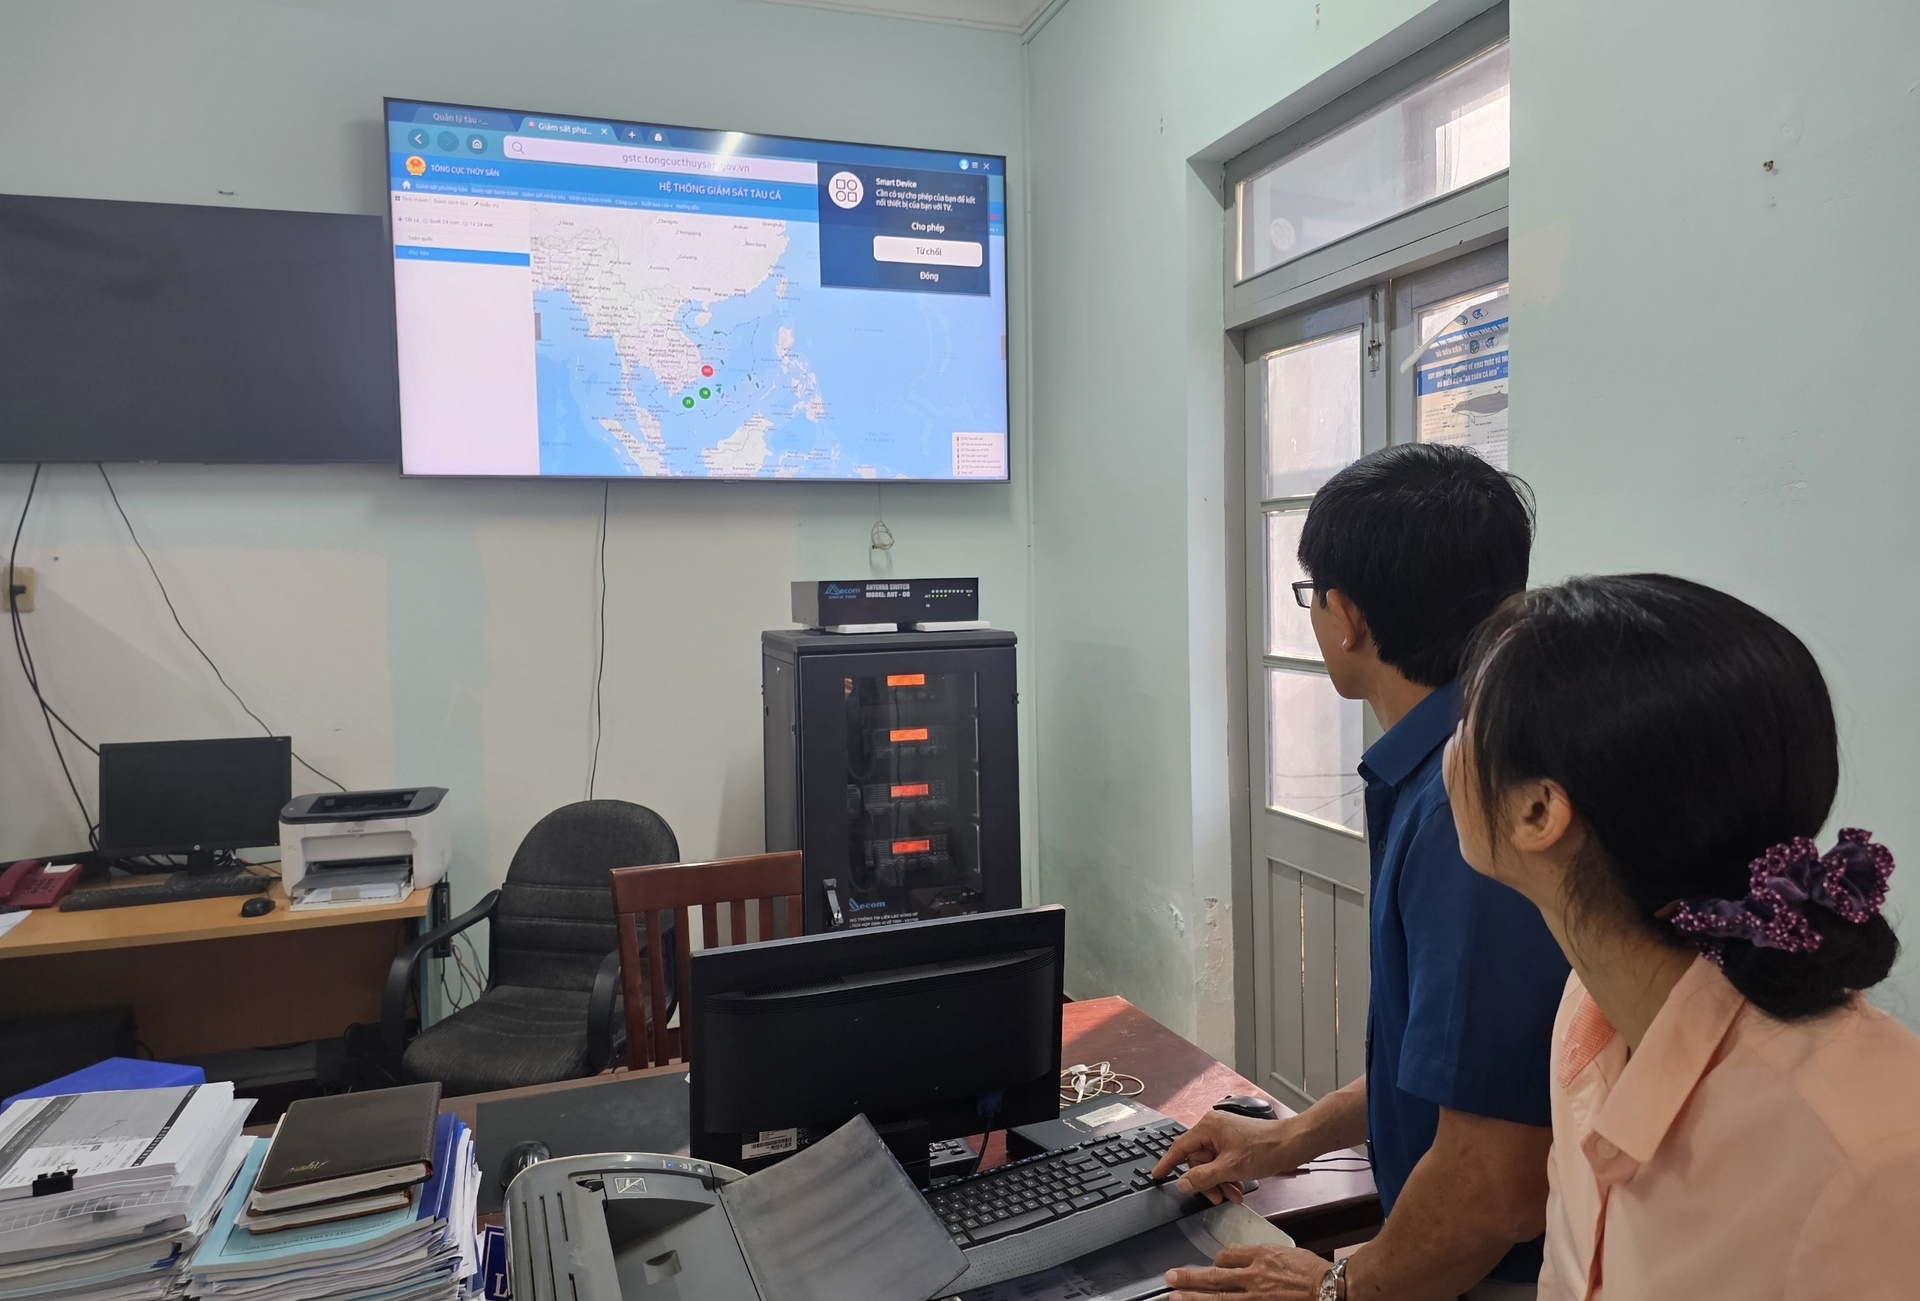 The functional forces in Phu Yen closely monitor the fishing fleet at sea through the fishing vessel monitoring system located at the Fisheries Sub-Department. Photo: KS.